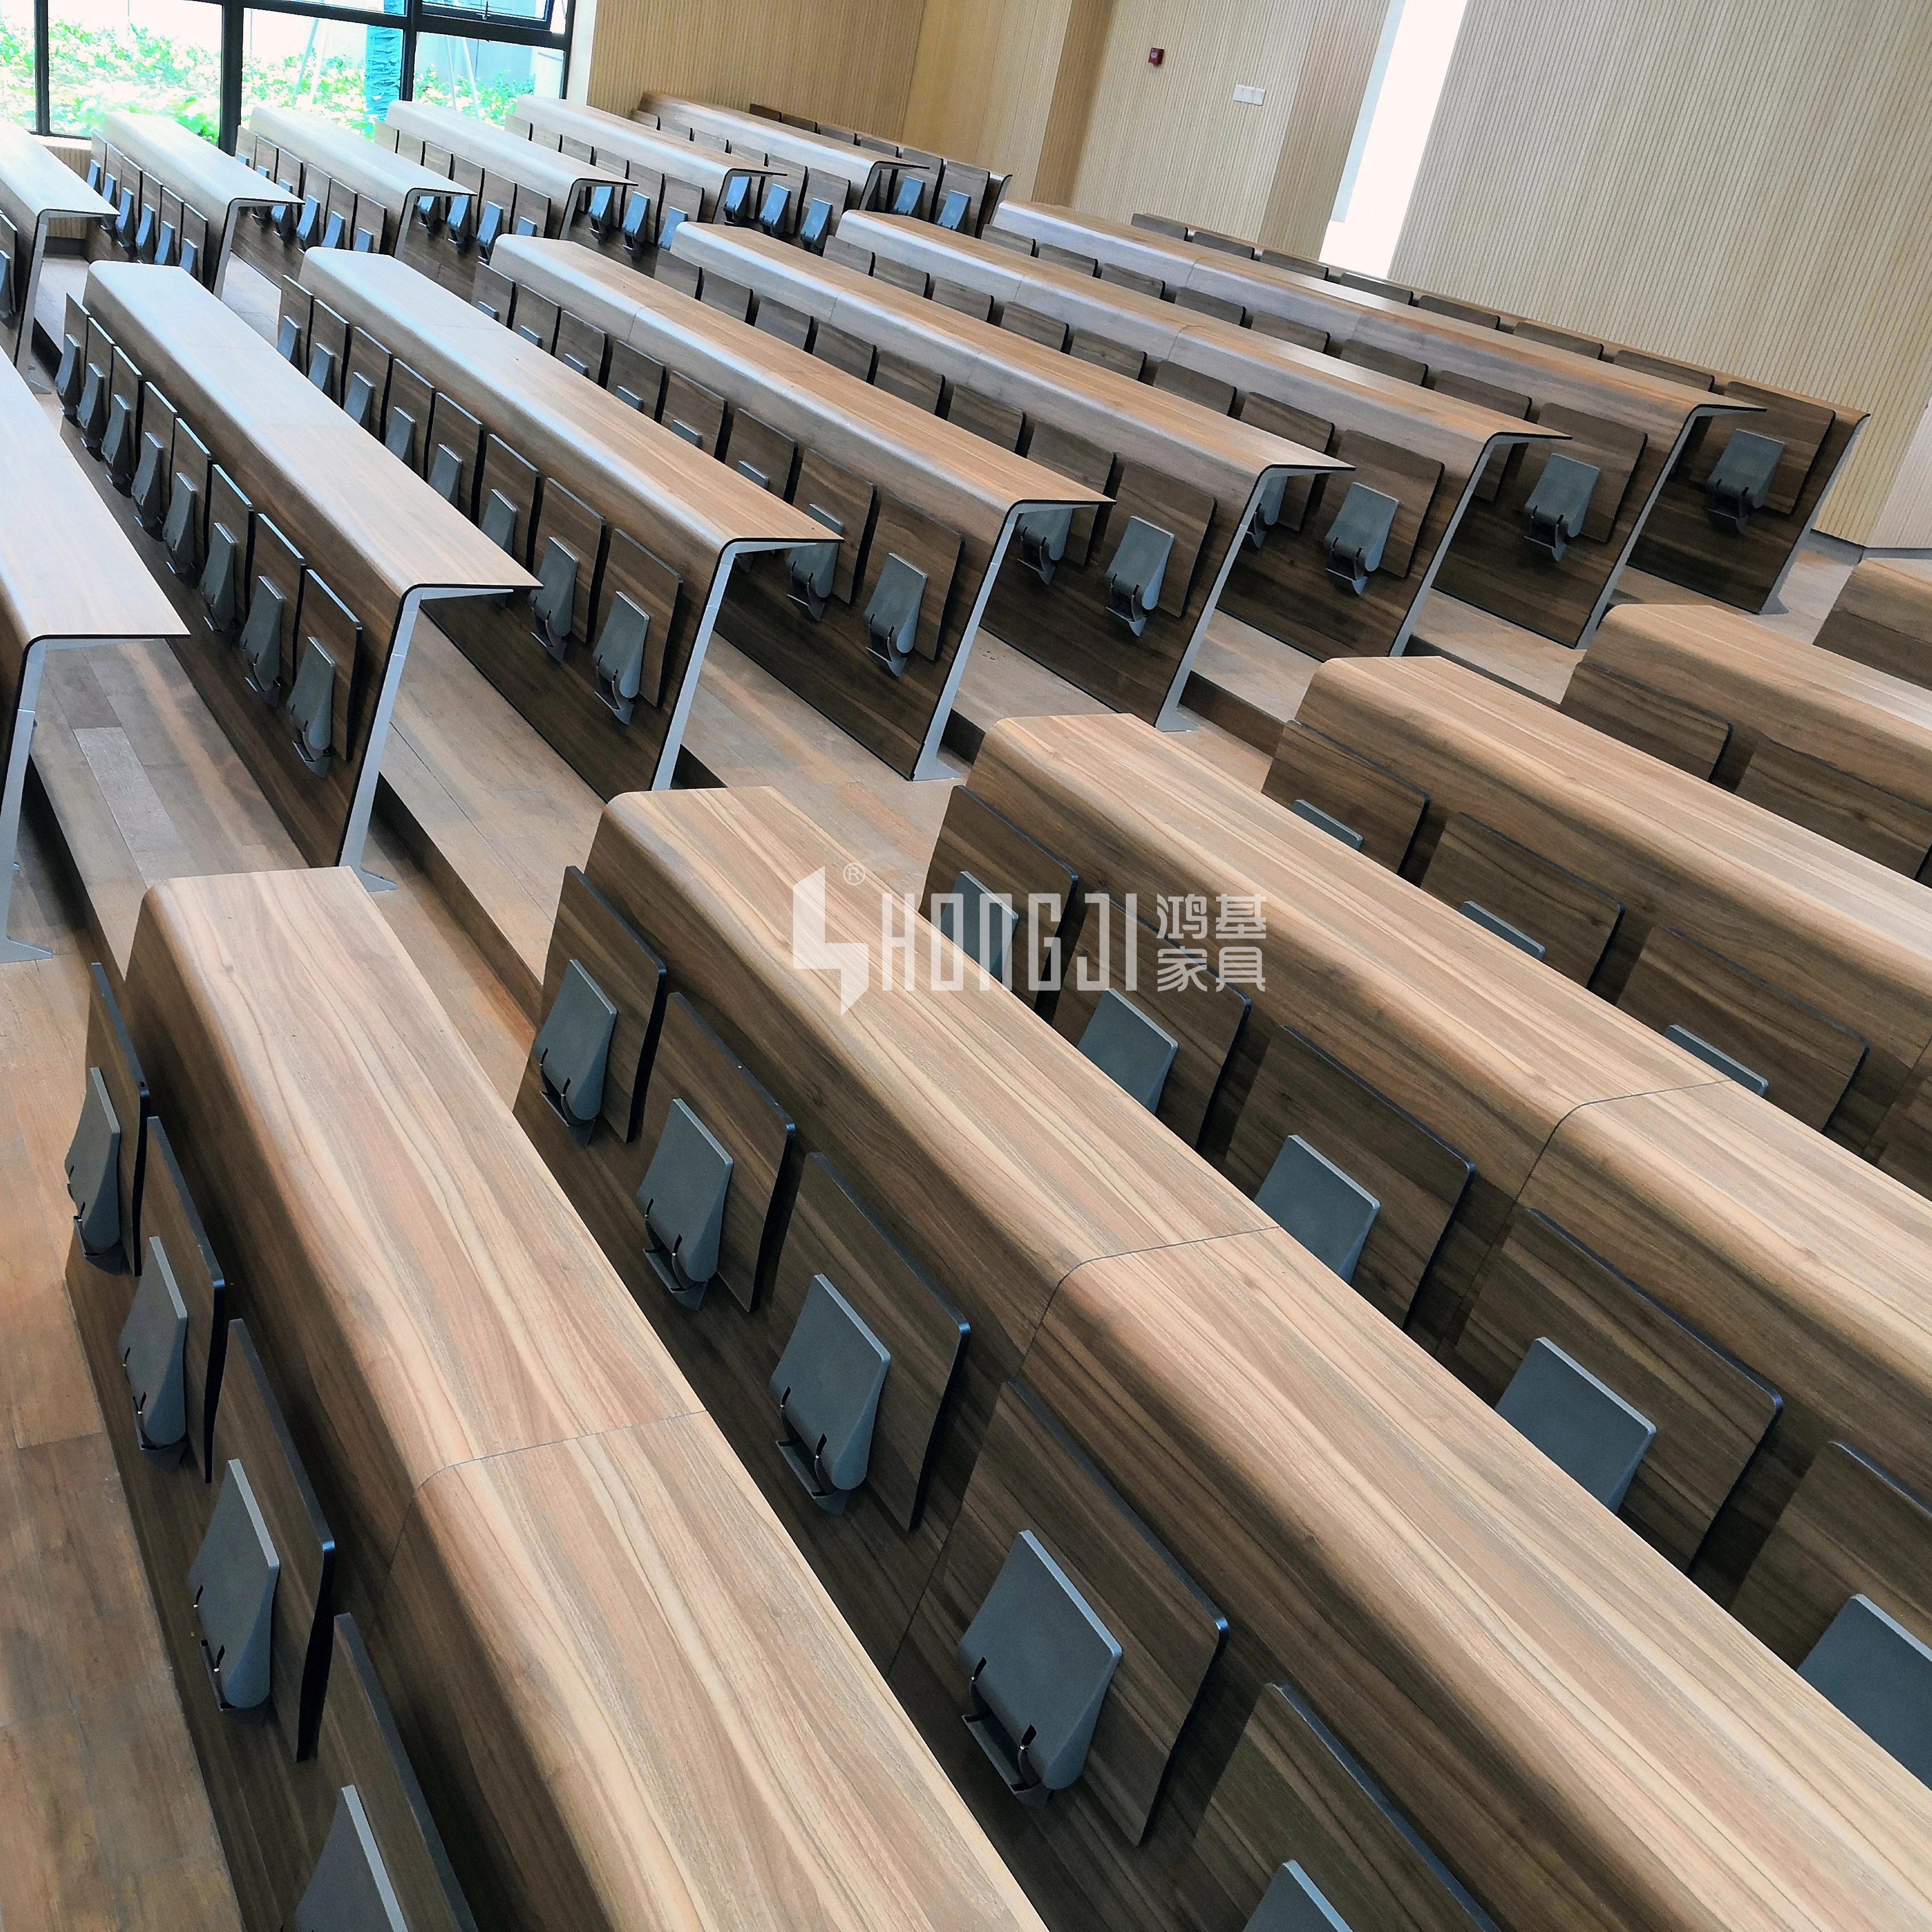 What Are The Different Types Of School Furniture